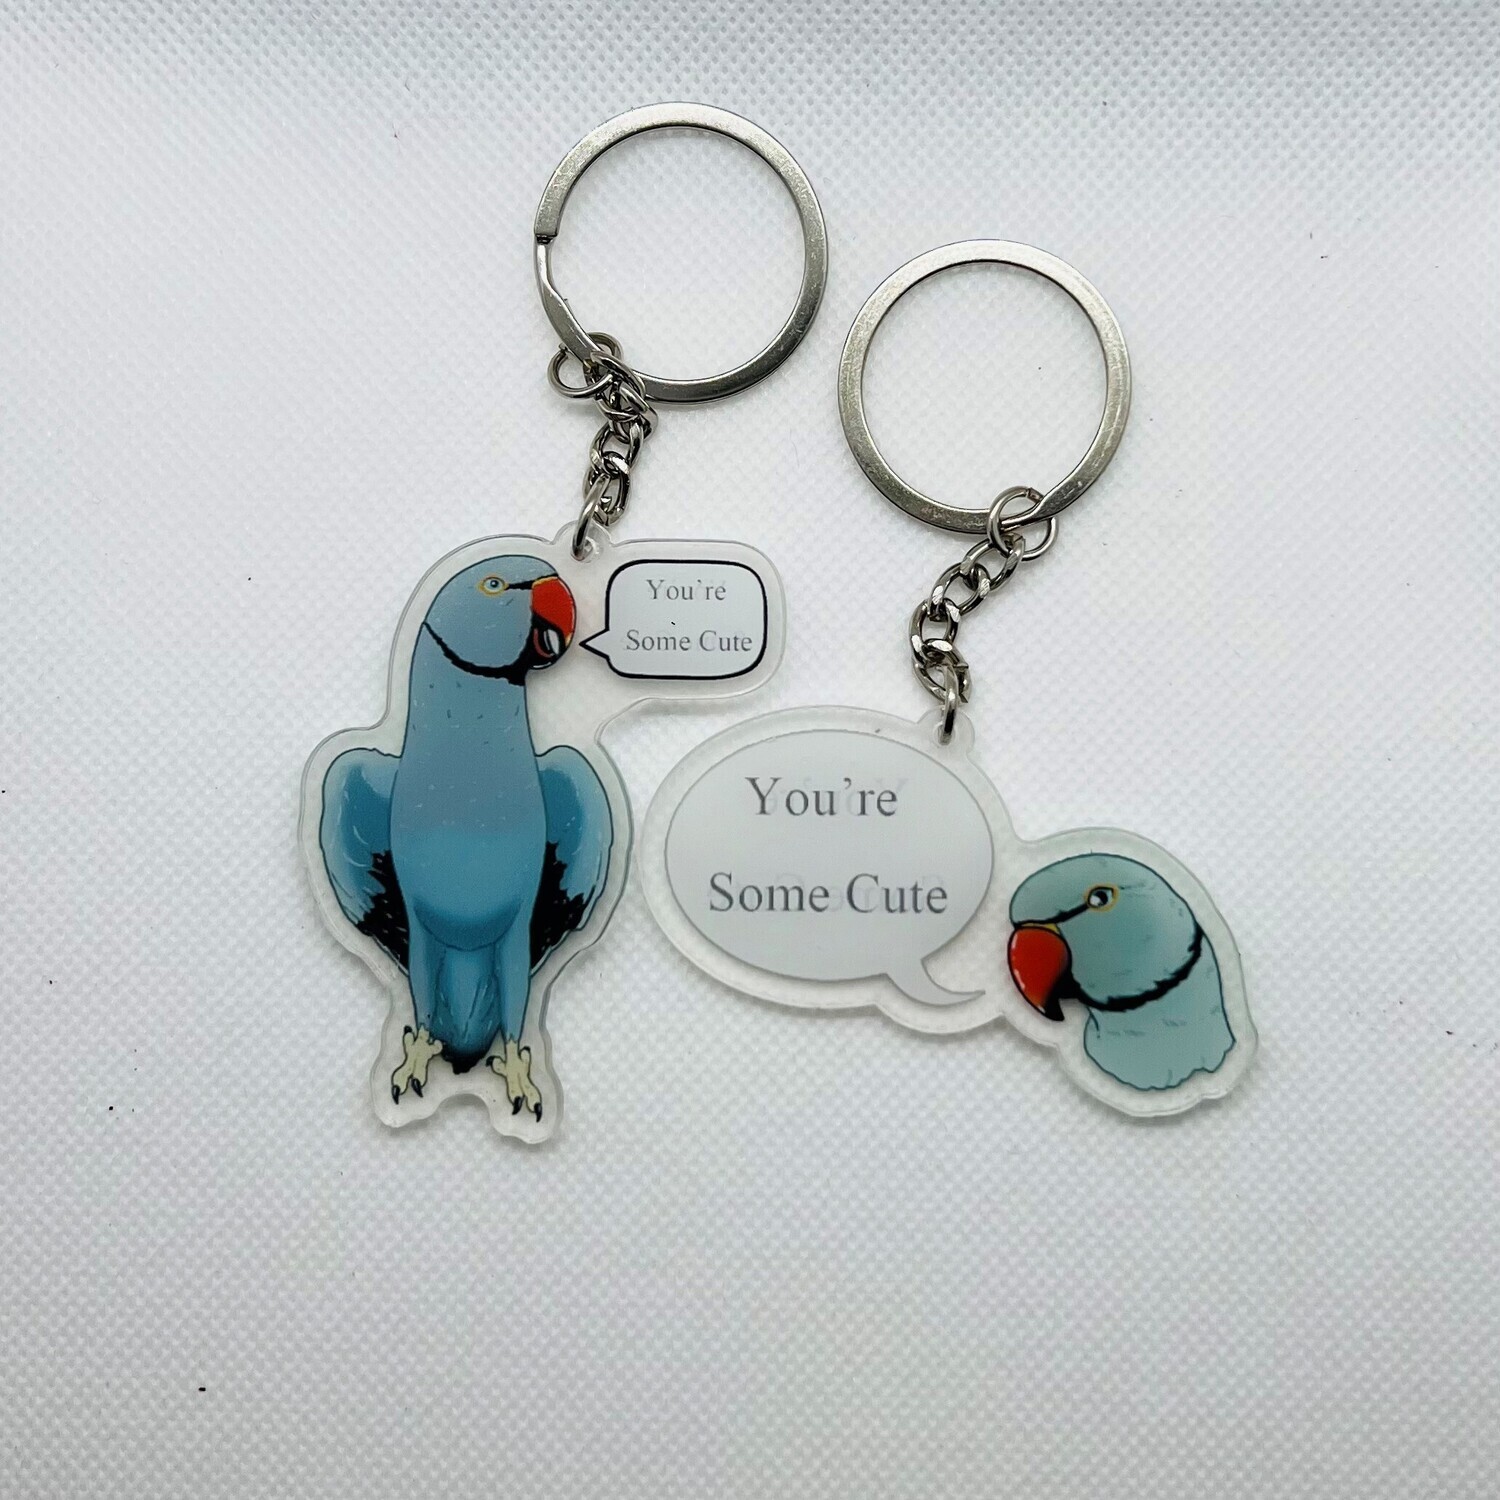 "You're Some Cute" Acrylic Keychain